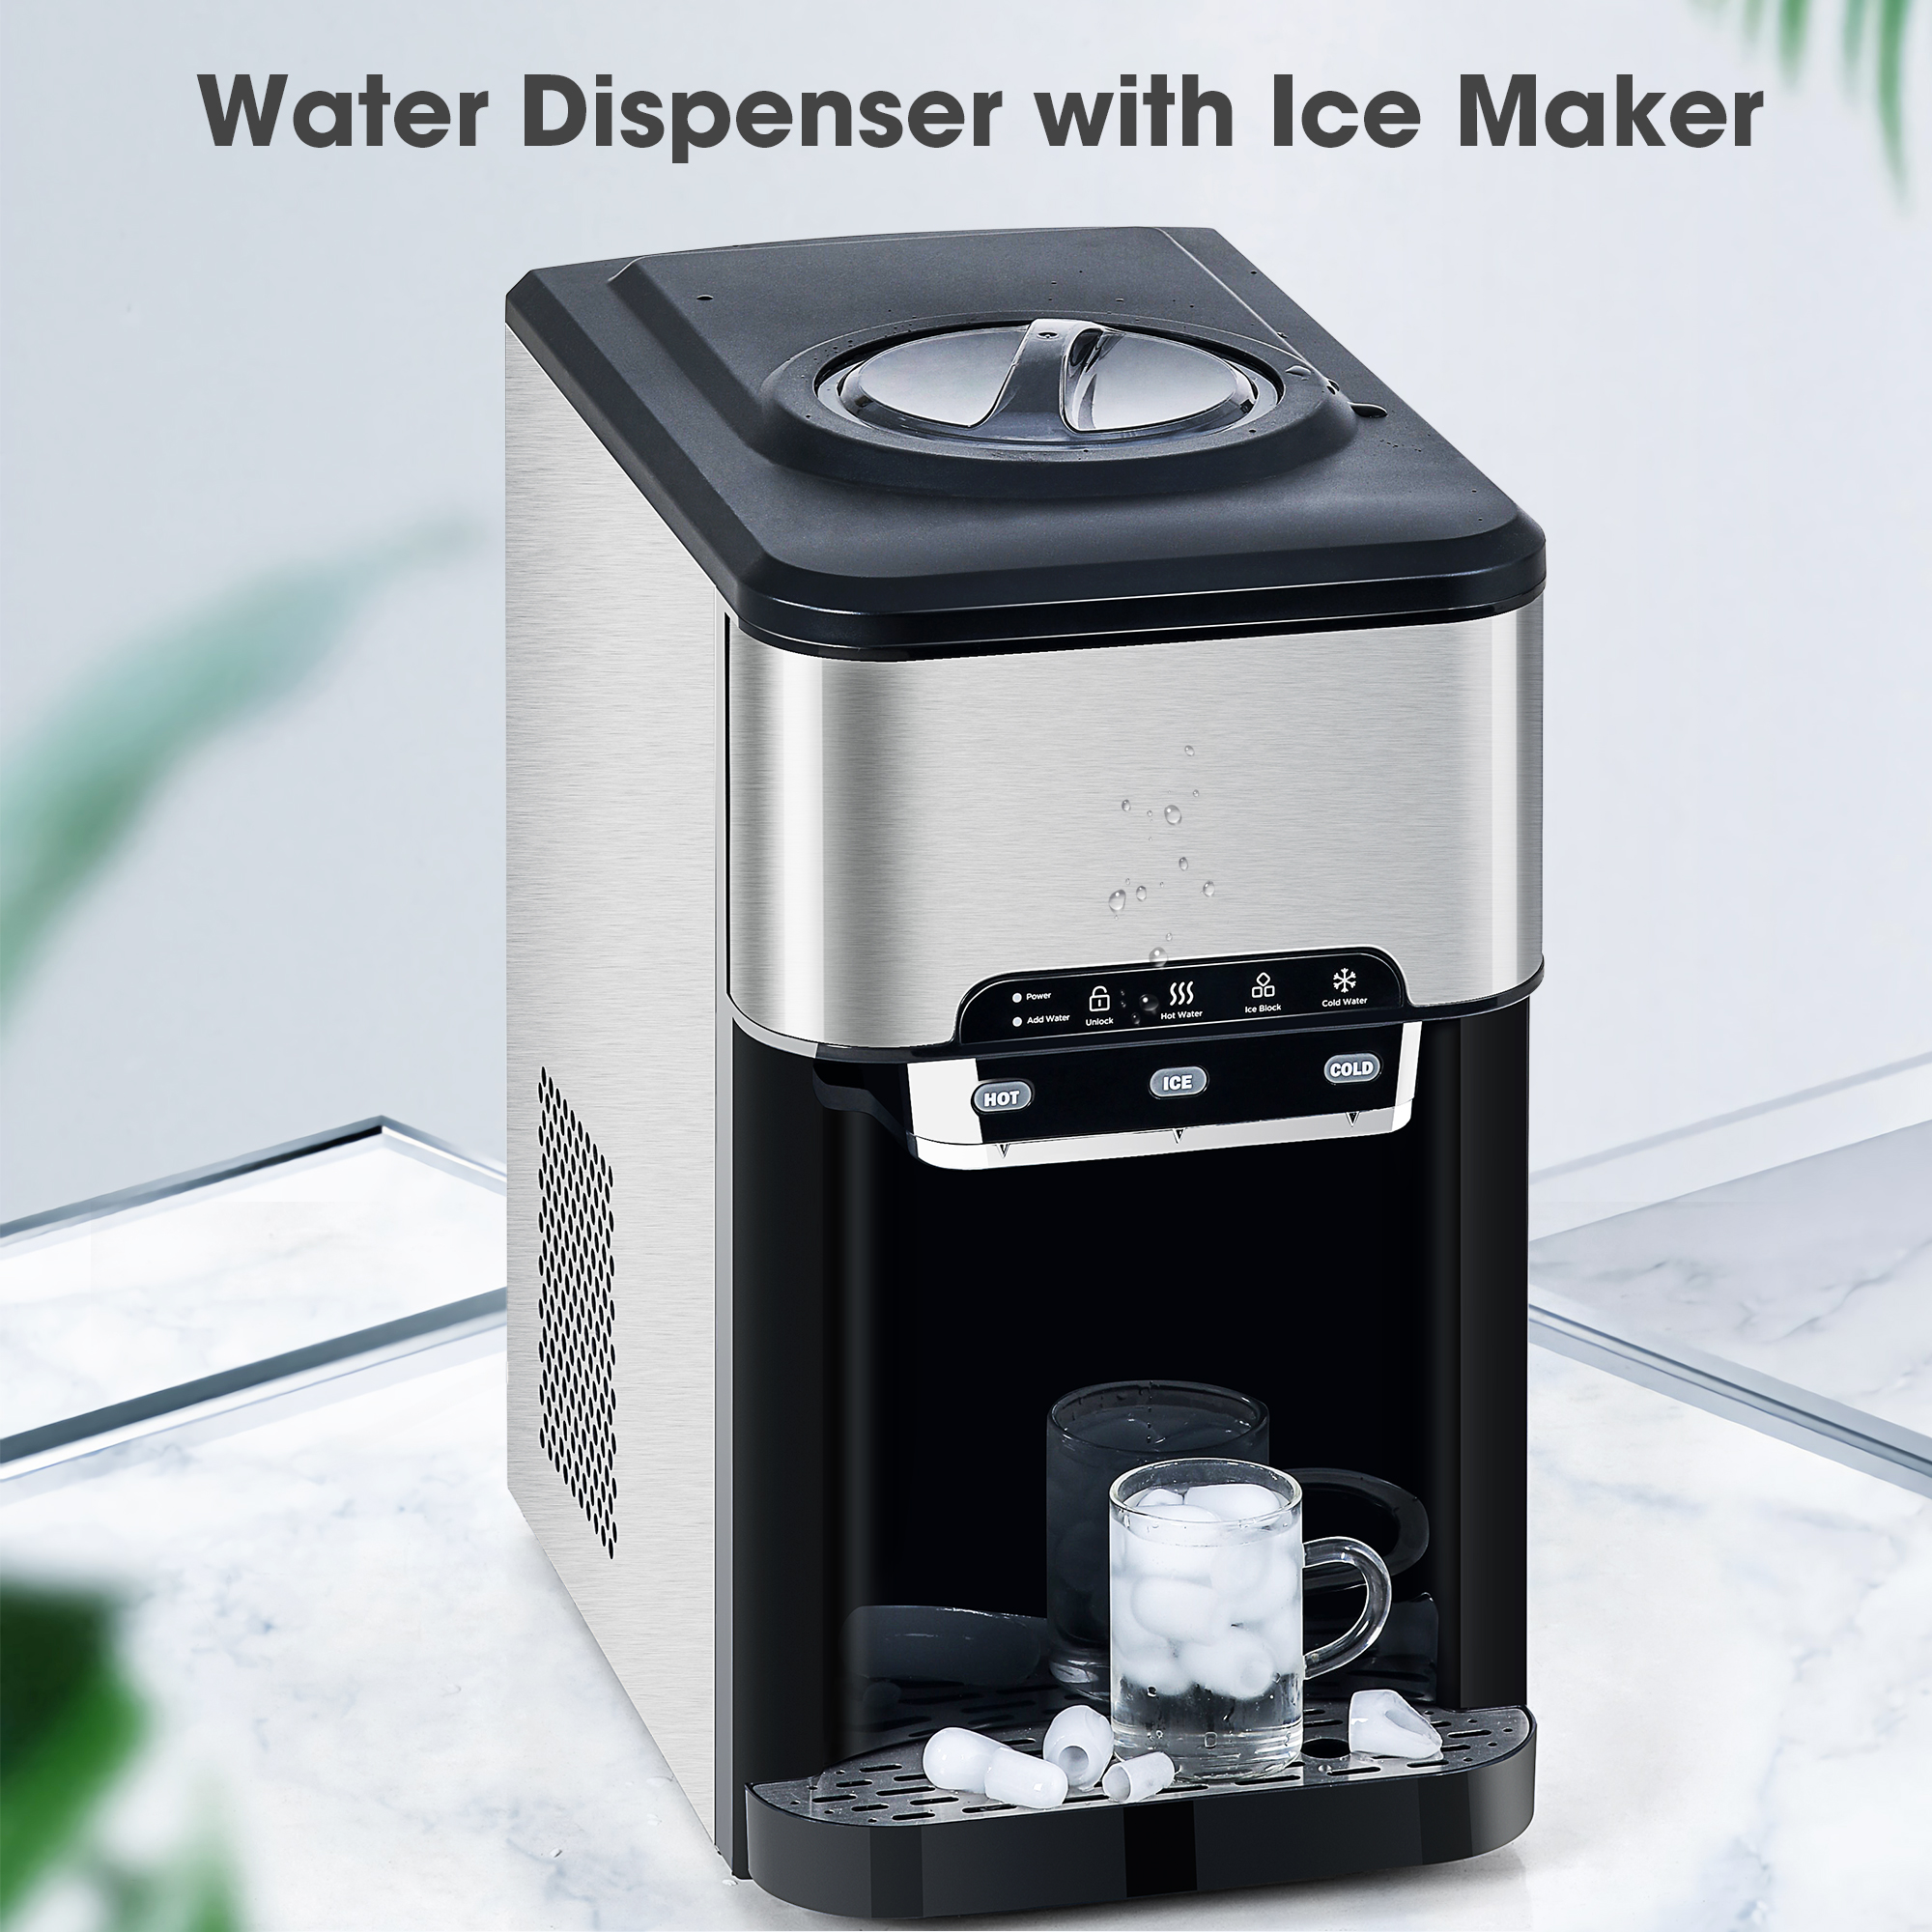 3 in 1 Water Dispenser with Ice Maker Machine Countertop, Portable Water Cooler, Quick 6 Mins Ice-making, Hot & Cold Water and Ice, Stainless Steel - image 1 of 10